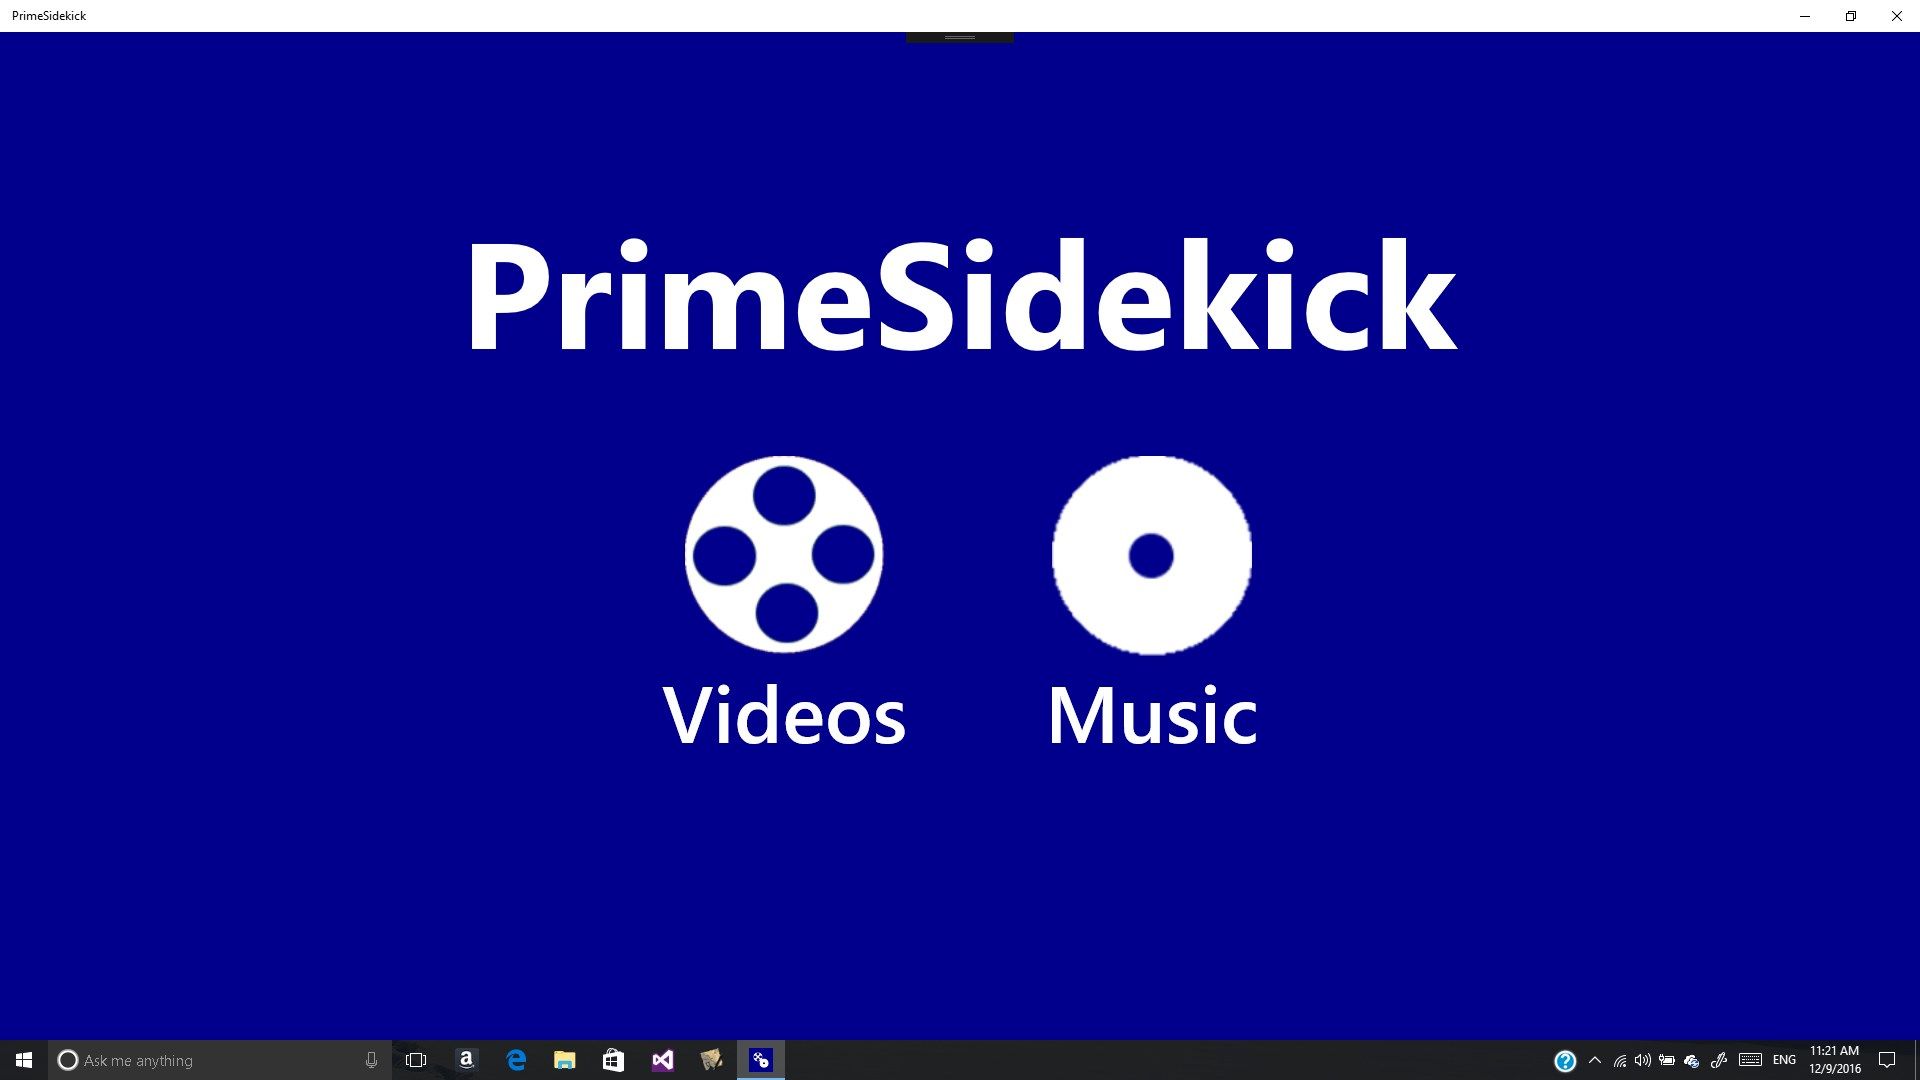 Main Screen allowing the user to switch between Amazon Prime Video and Amazon Prime Music titles.